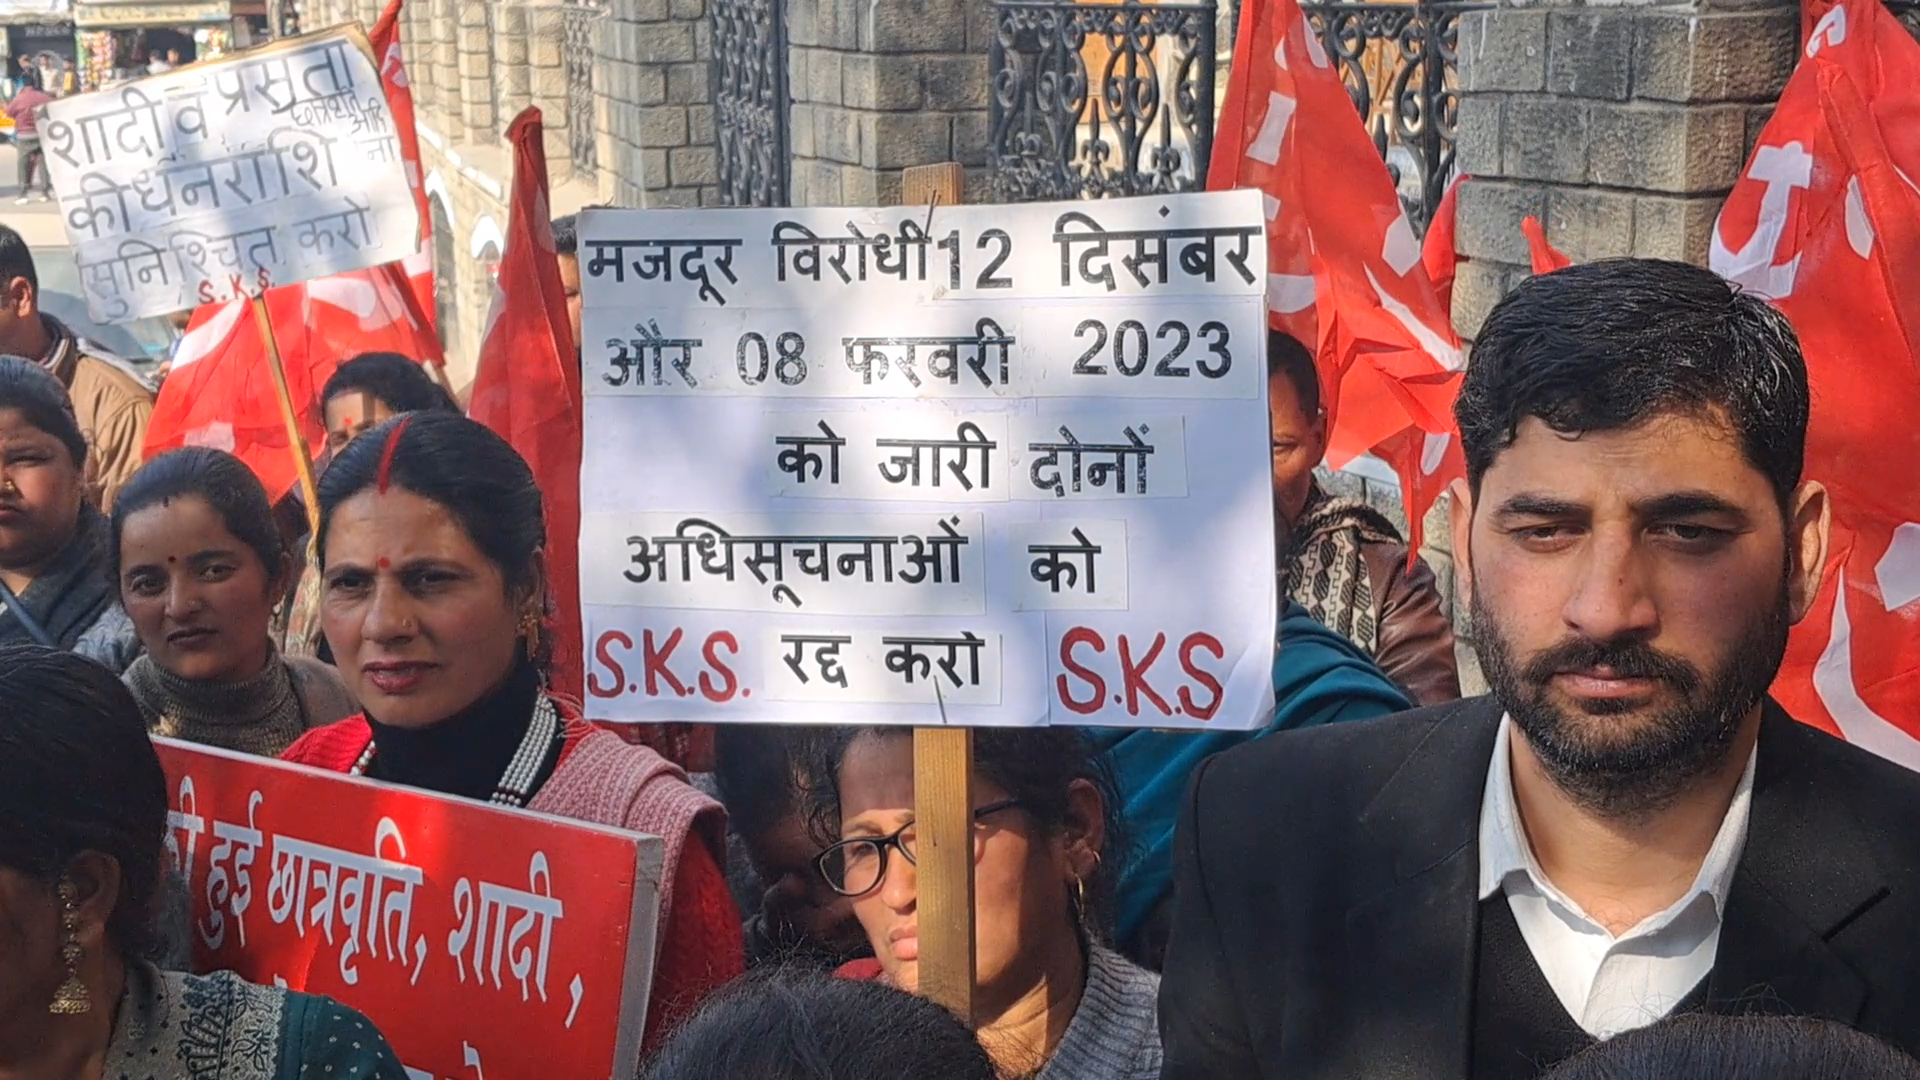 Workers Protest Against Sukhu Govt